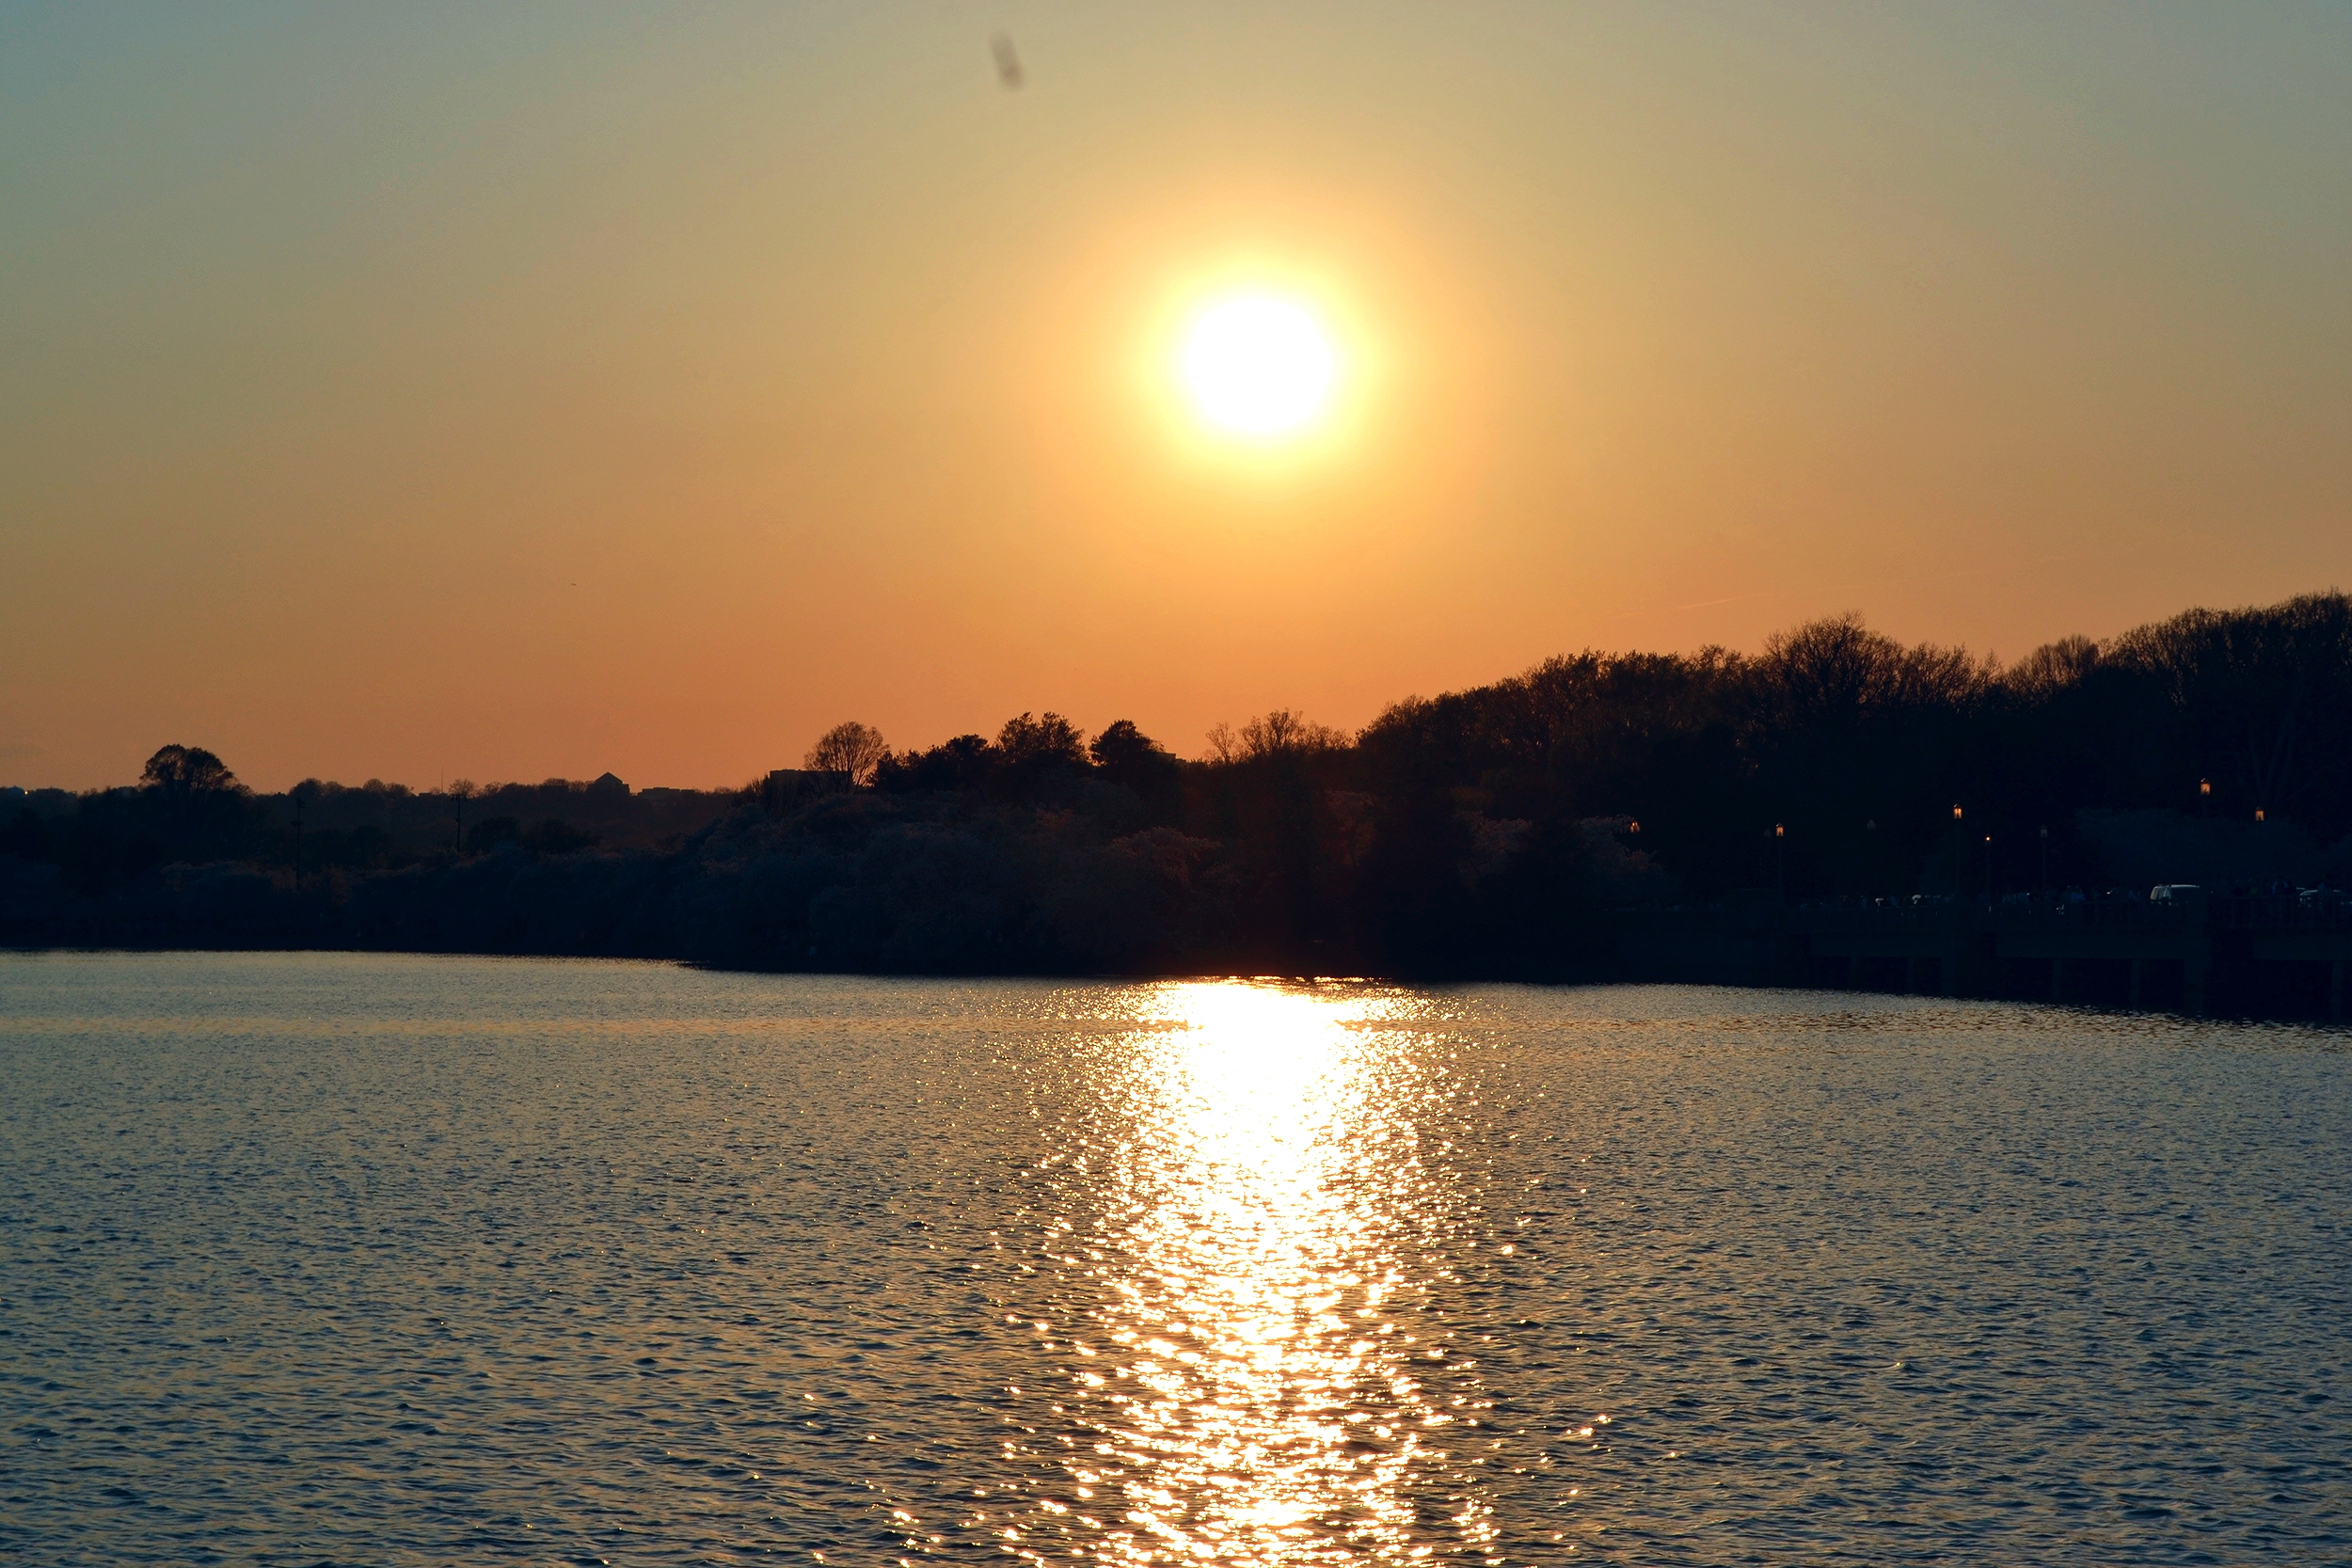 Sunset over the Potomac River